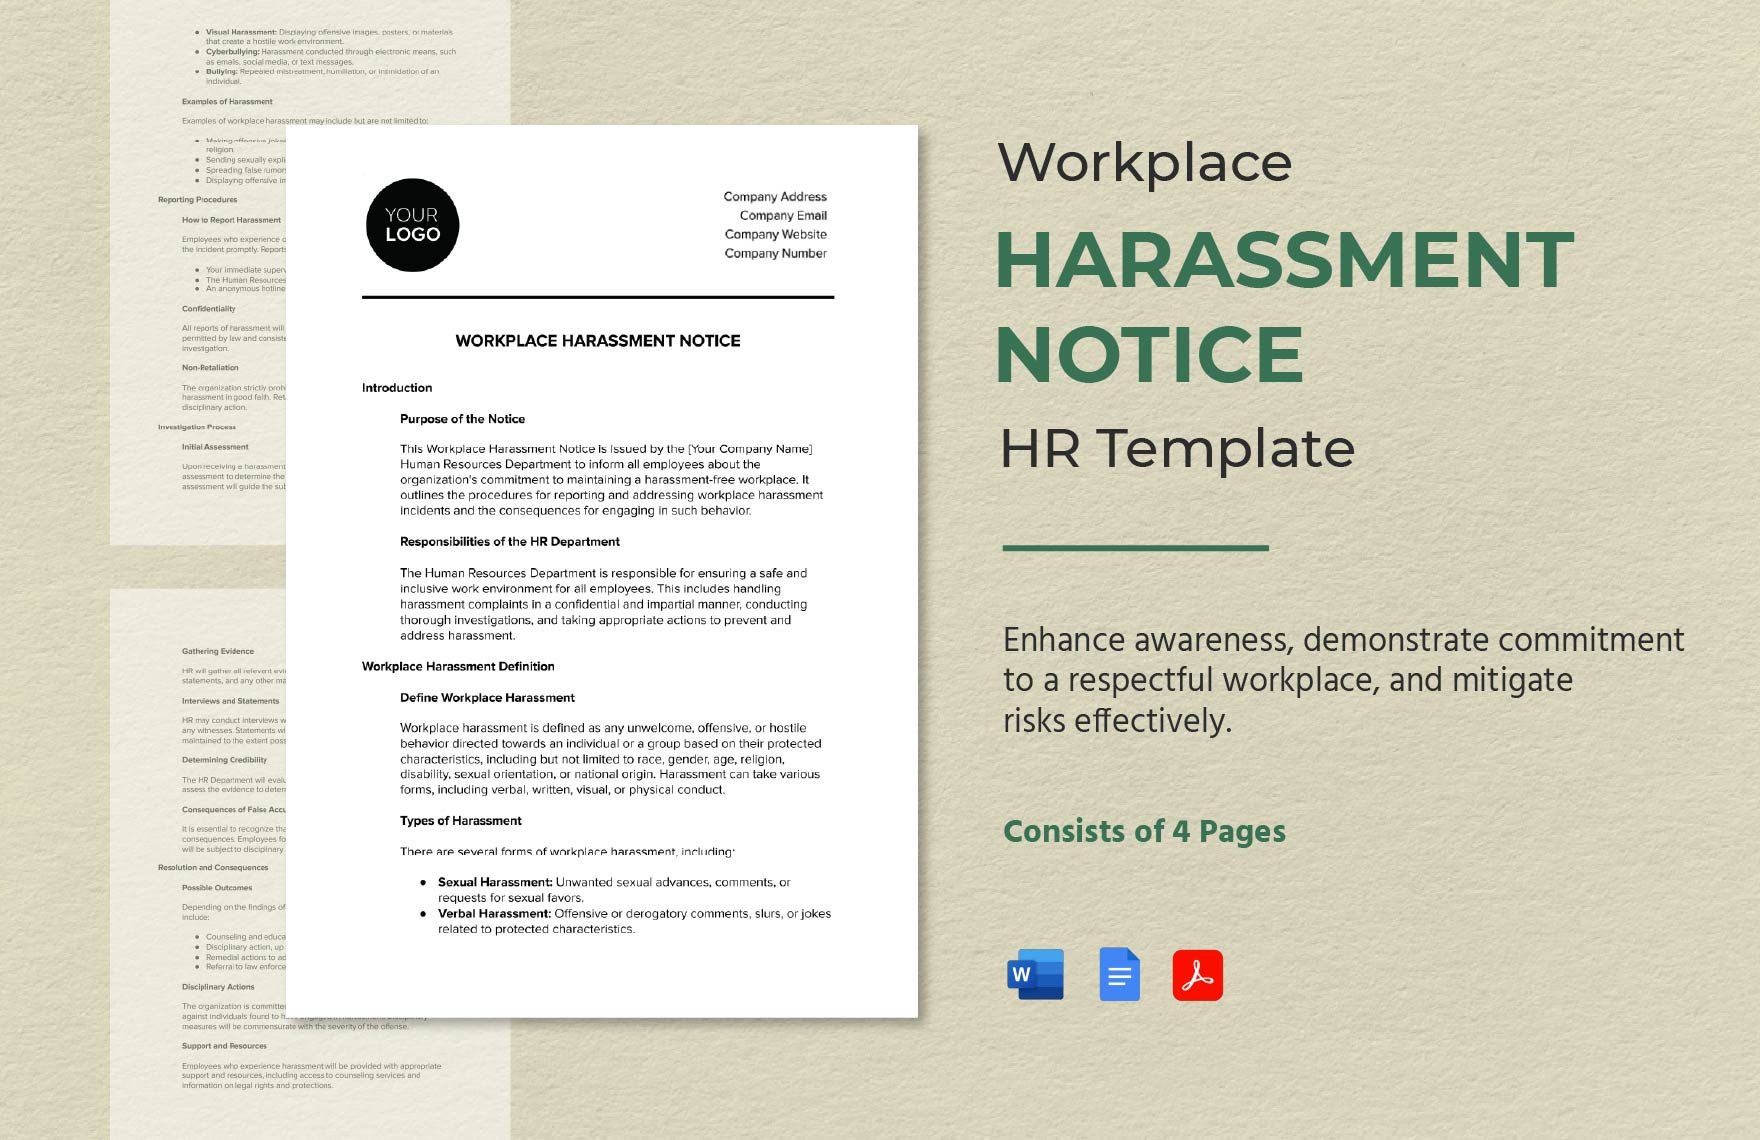 Workplace Harassment Notice HR Template